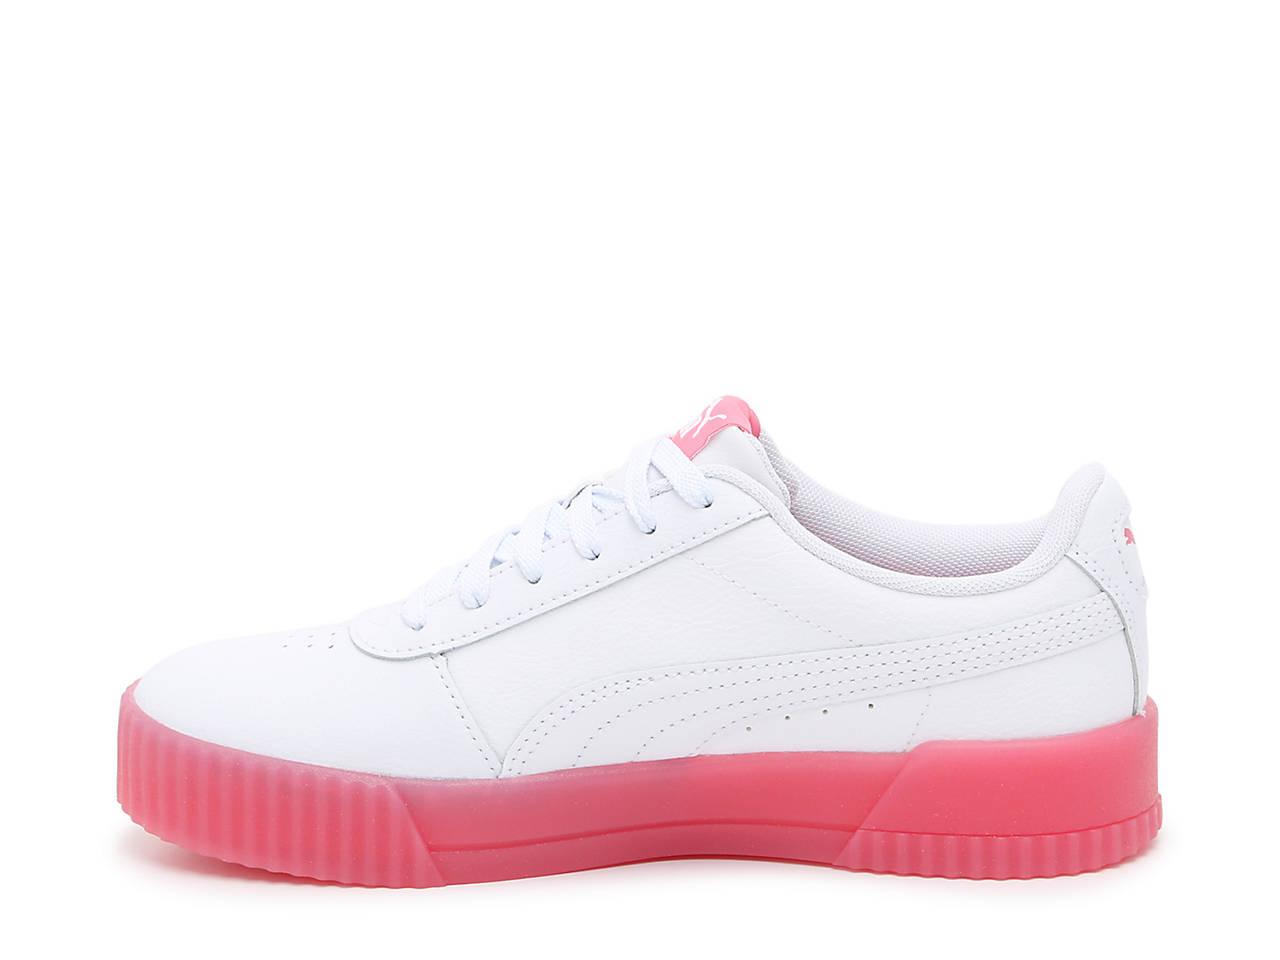 PUMA Leather Carina Crystal Sneaker in White/Pink (White) - Lyst